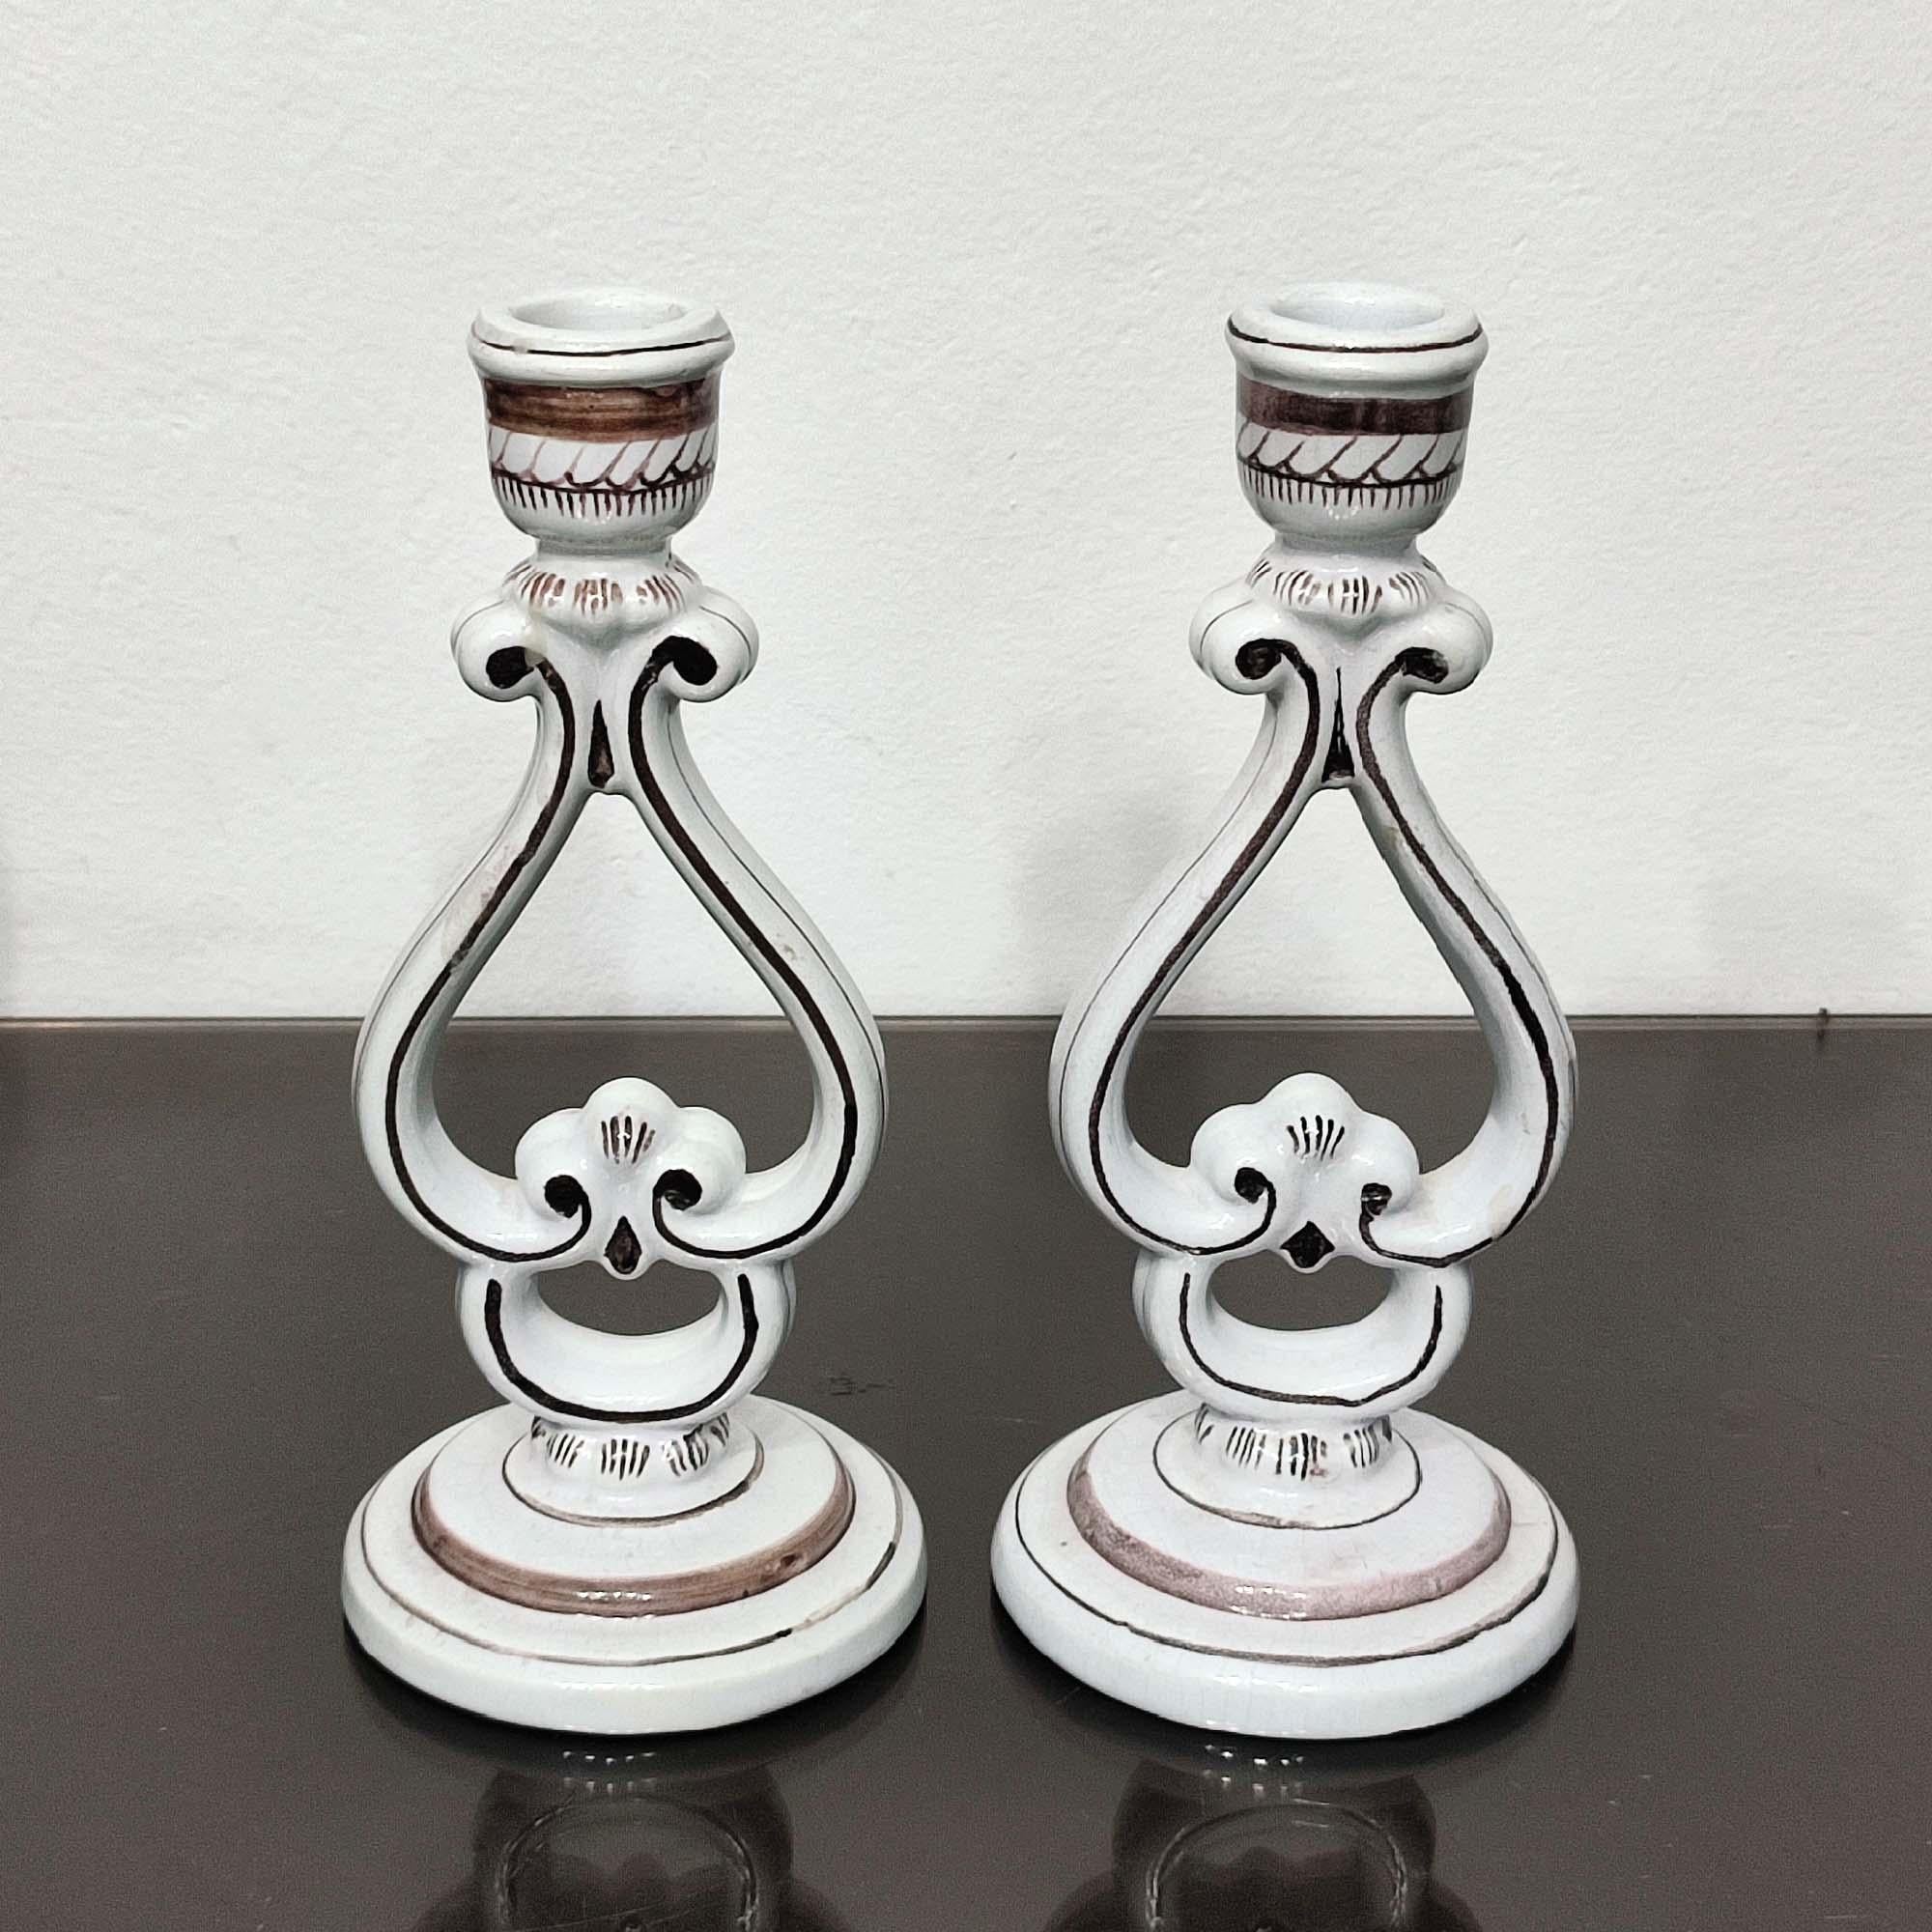 Swedish Art Deco Ceramic Candleholders Designed by Arthur Percy for Gefle, Sweden, 1920s For Sale